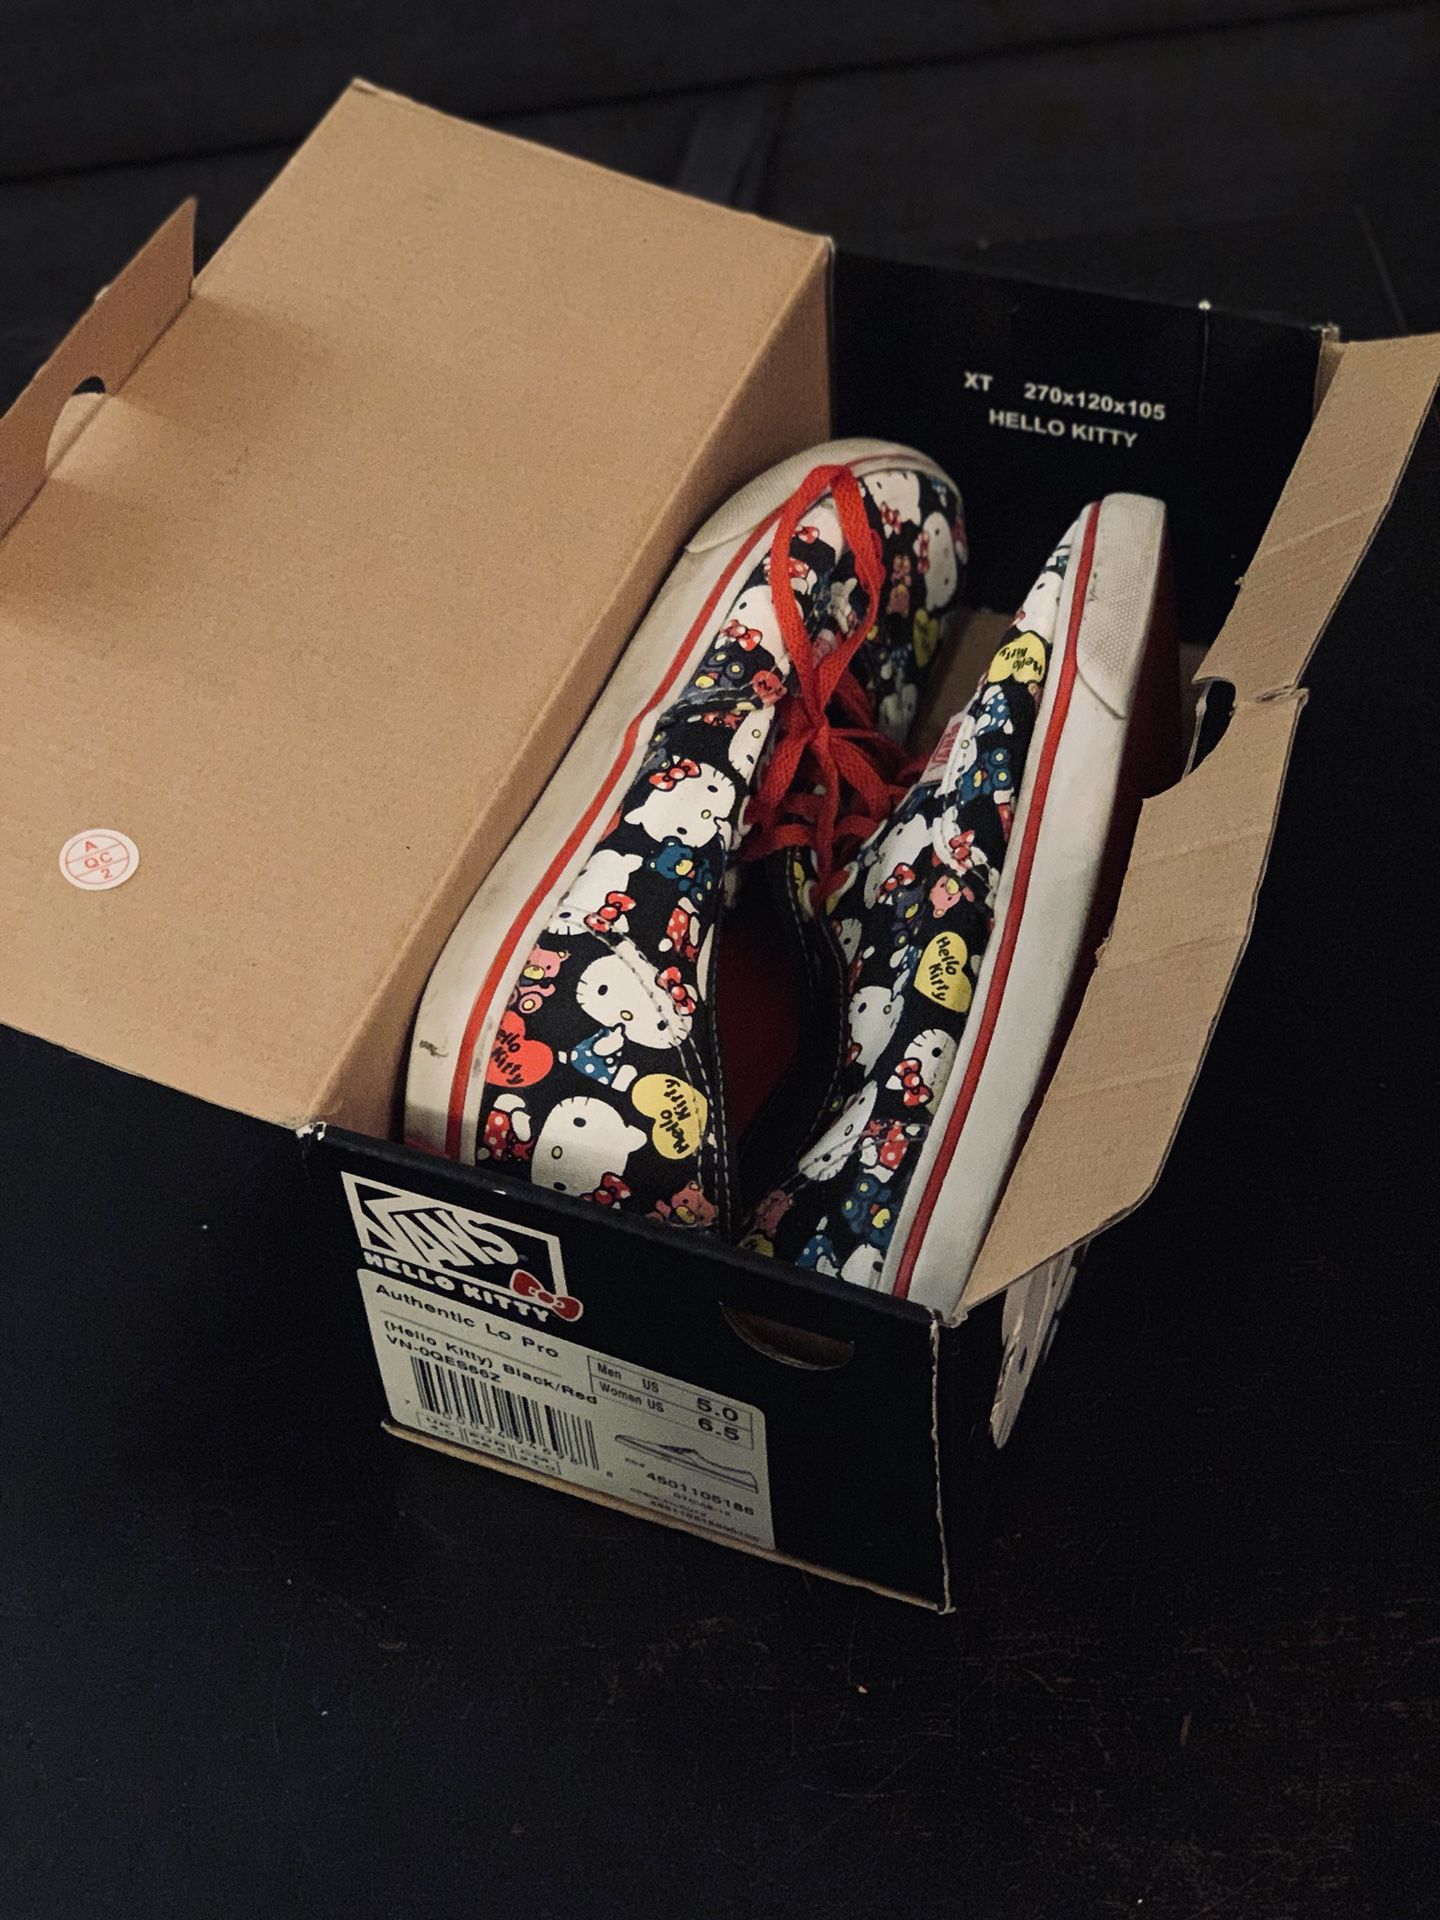 Hello Kitty Vans “Off the Wall” Lo Pro size 6.5